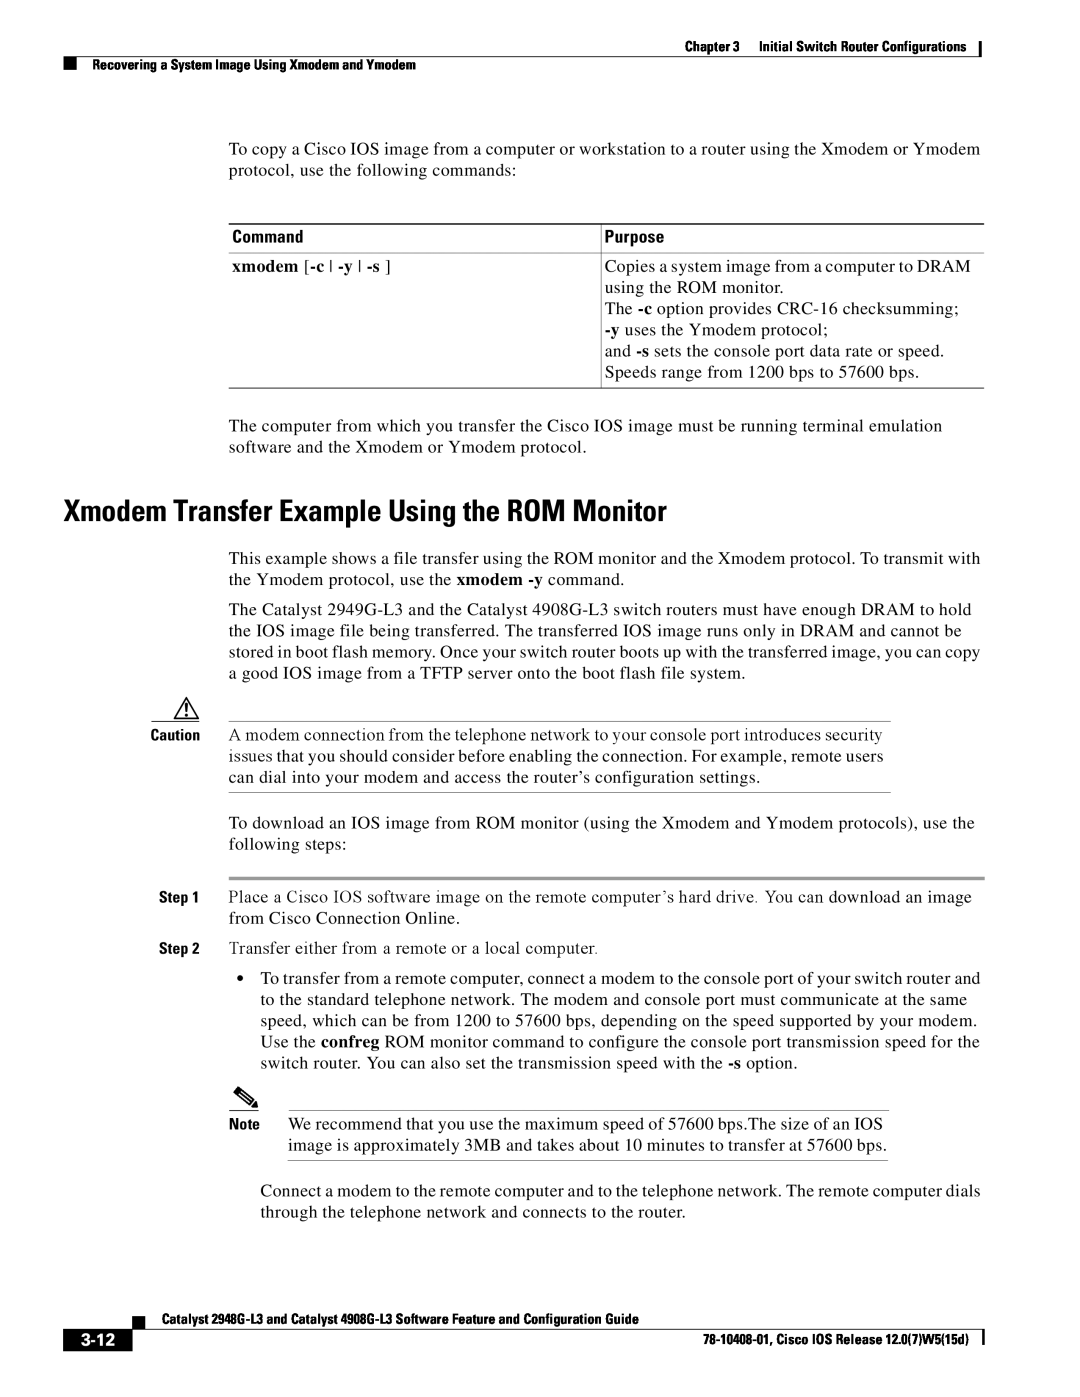 Cisco Systems manual Xmodem Transfer Example Using the ROM Monitor, xmodem -c -y -s, 3-12, Command, Purpose 